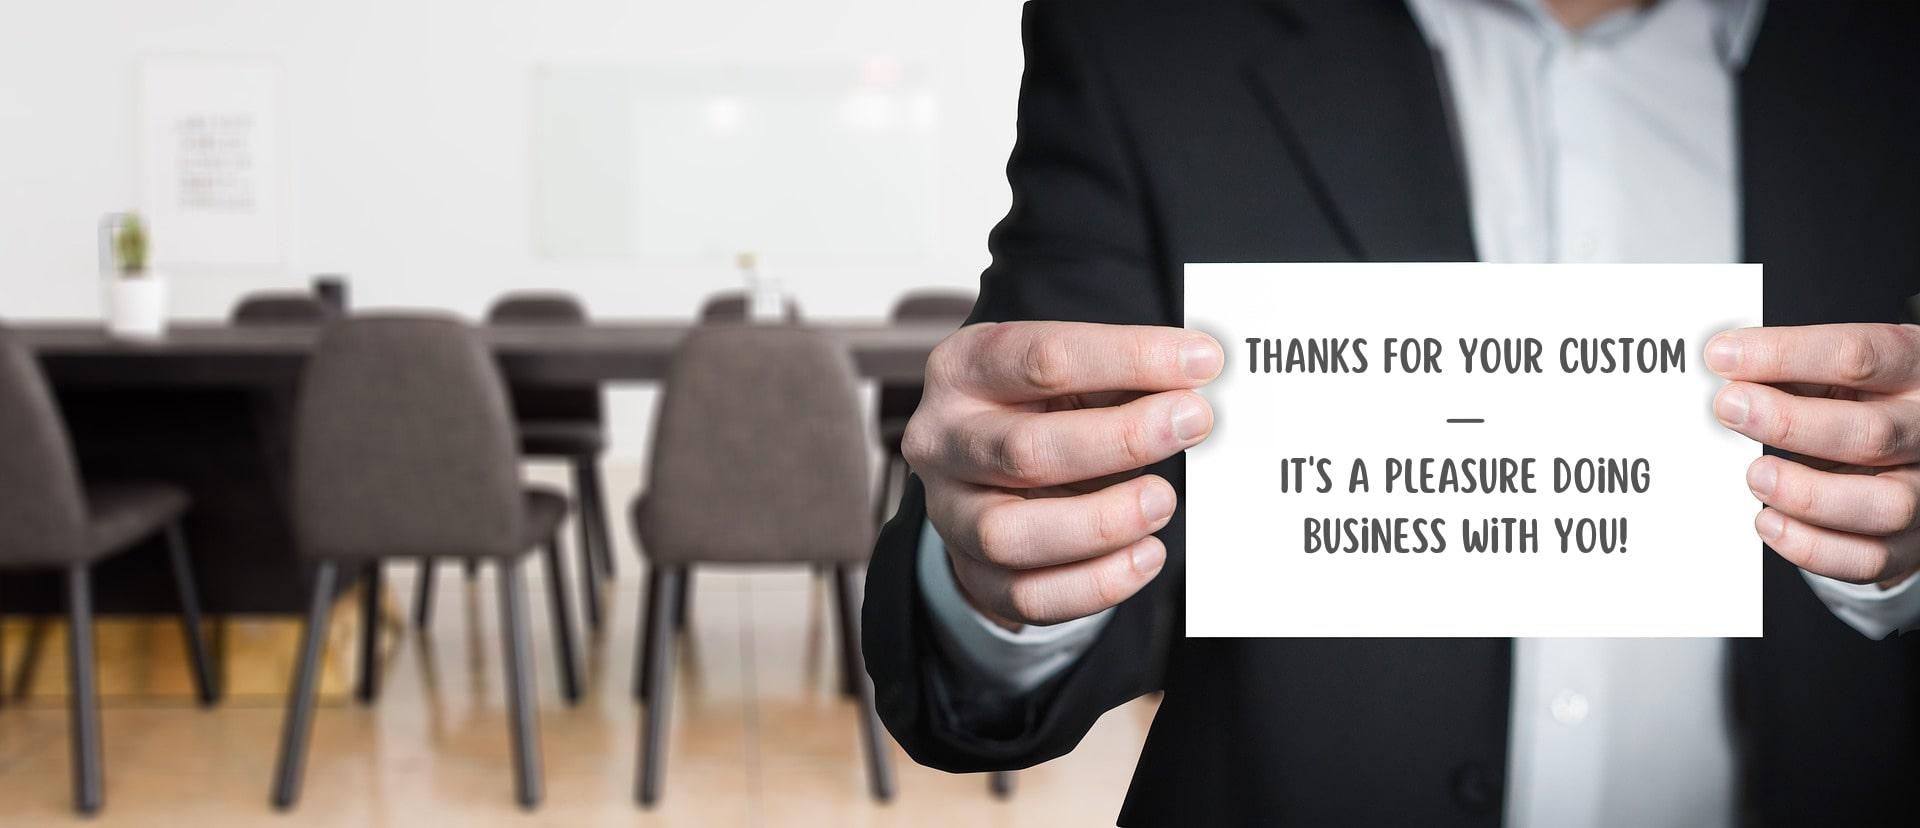 Man in business jacket holding a written card up to the camera, with a boardroom in the background. Image by Gerd Altmann from Pixabay